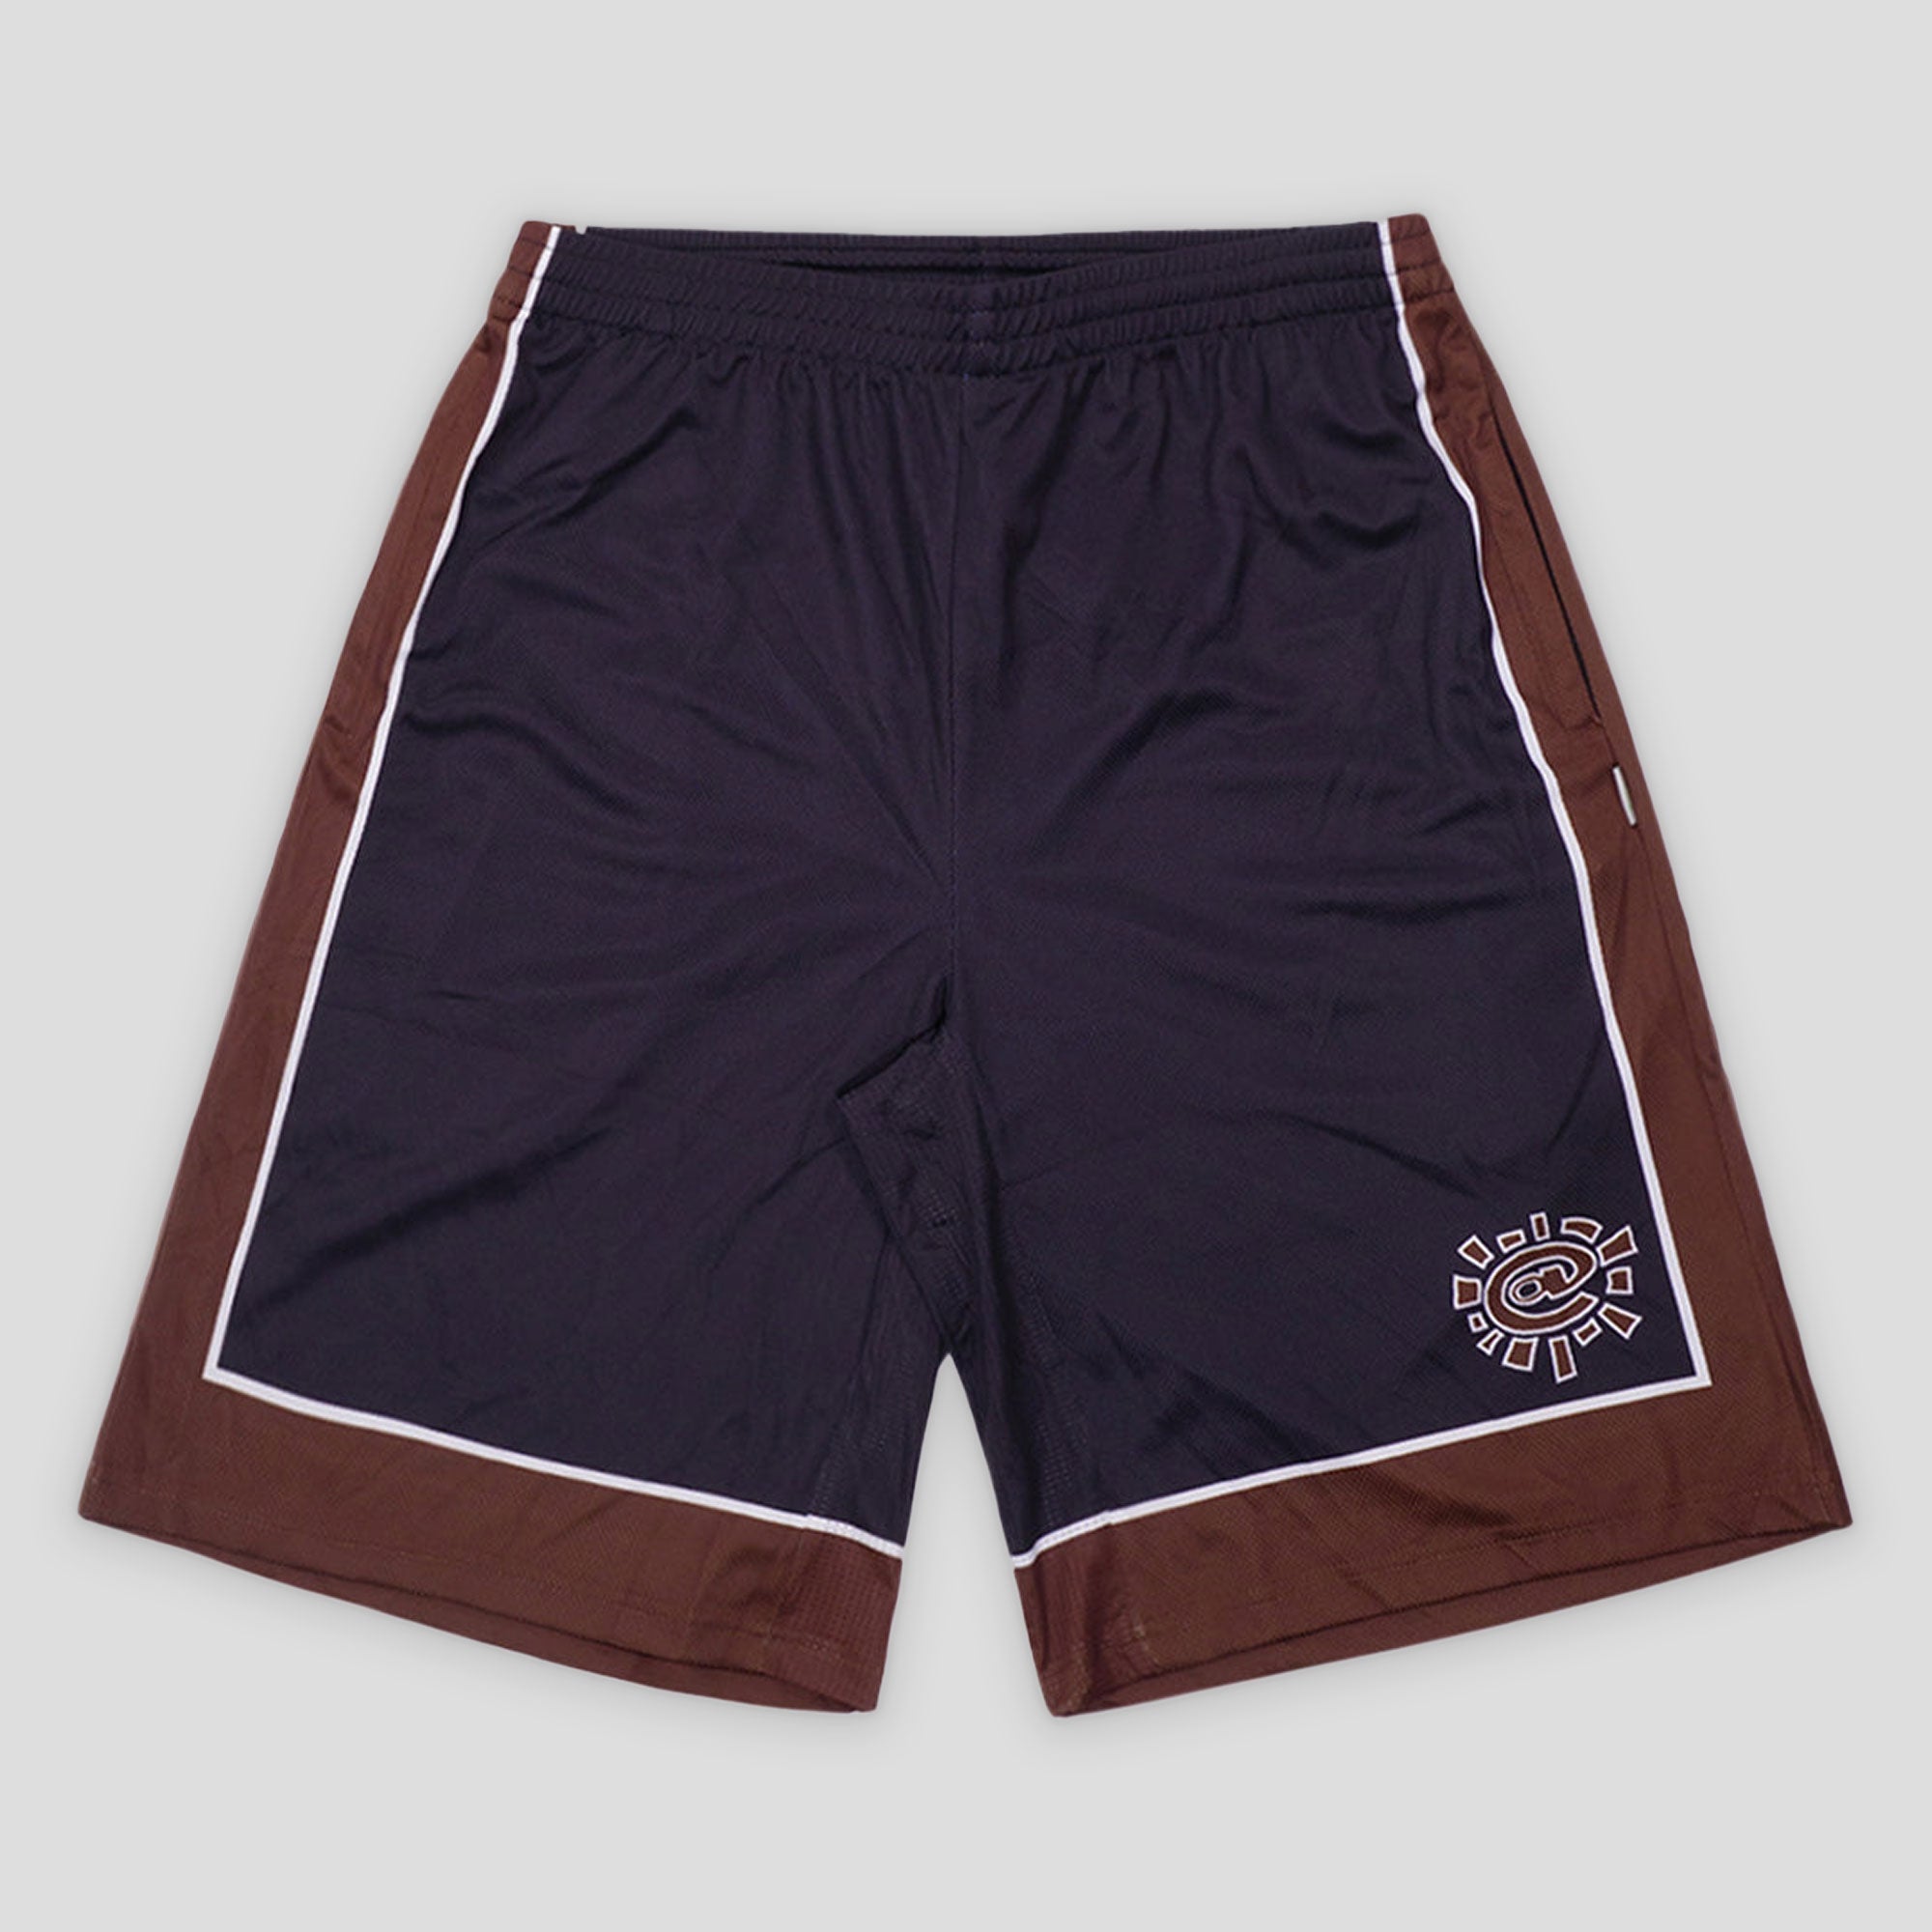 Always Do What You Should Do Court Shorts - Black/Brown